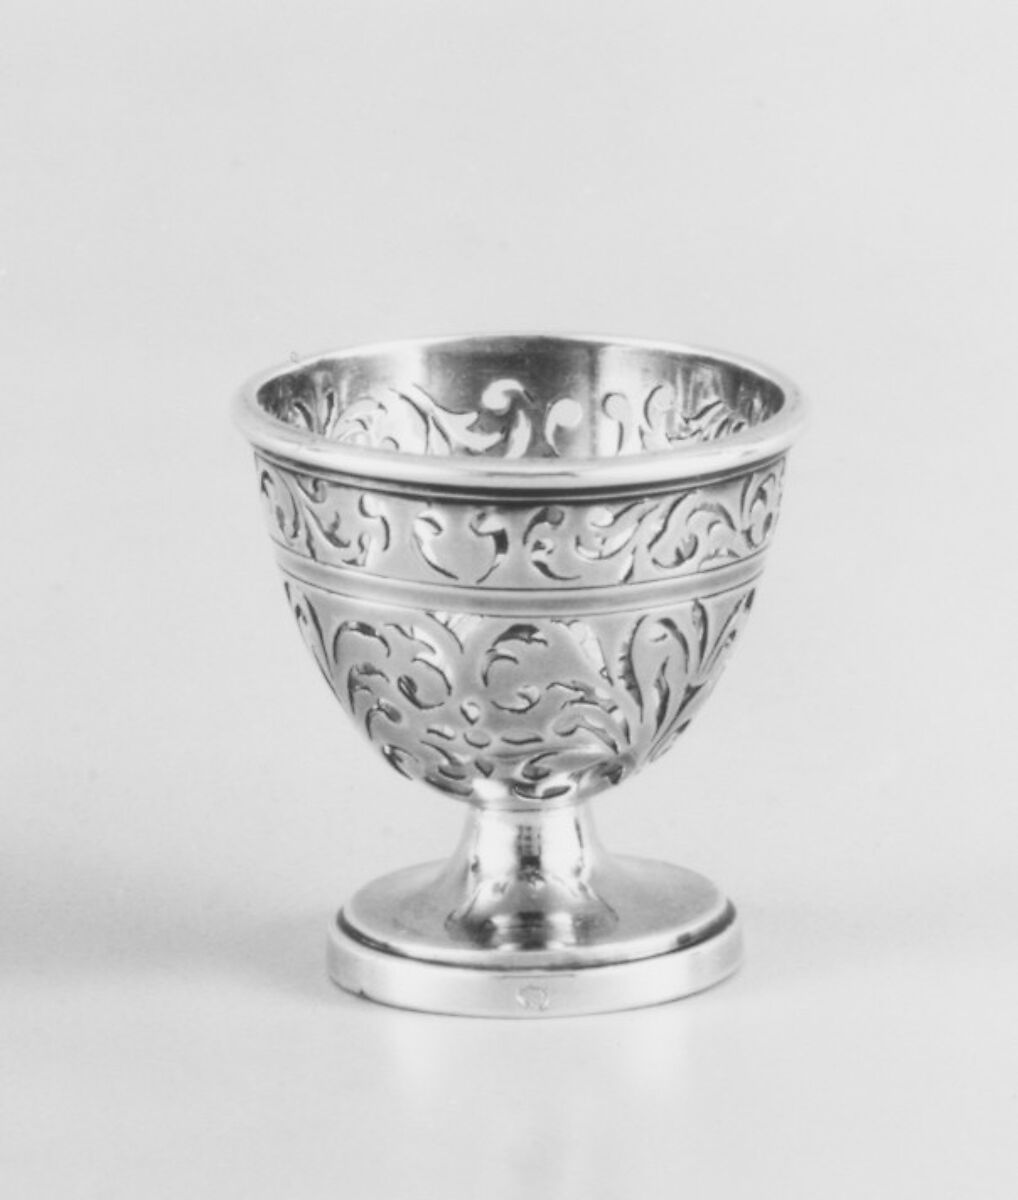 Egg cup, Silver, French, Paris 